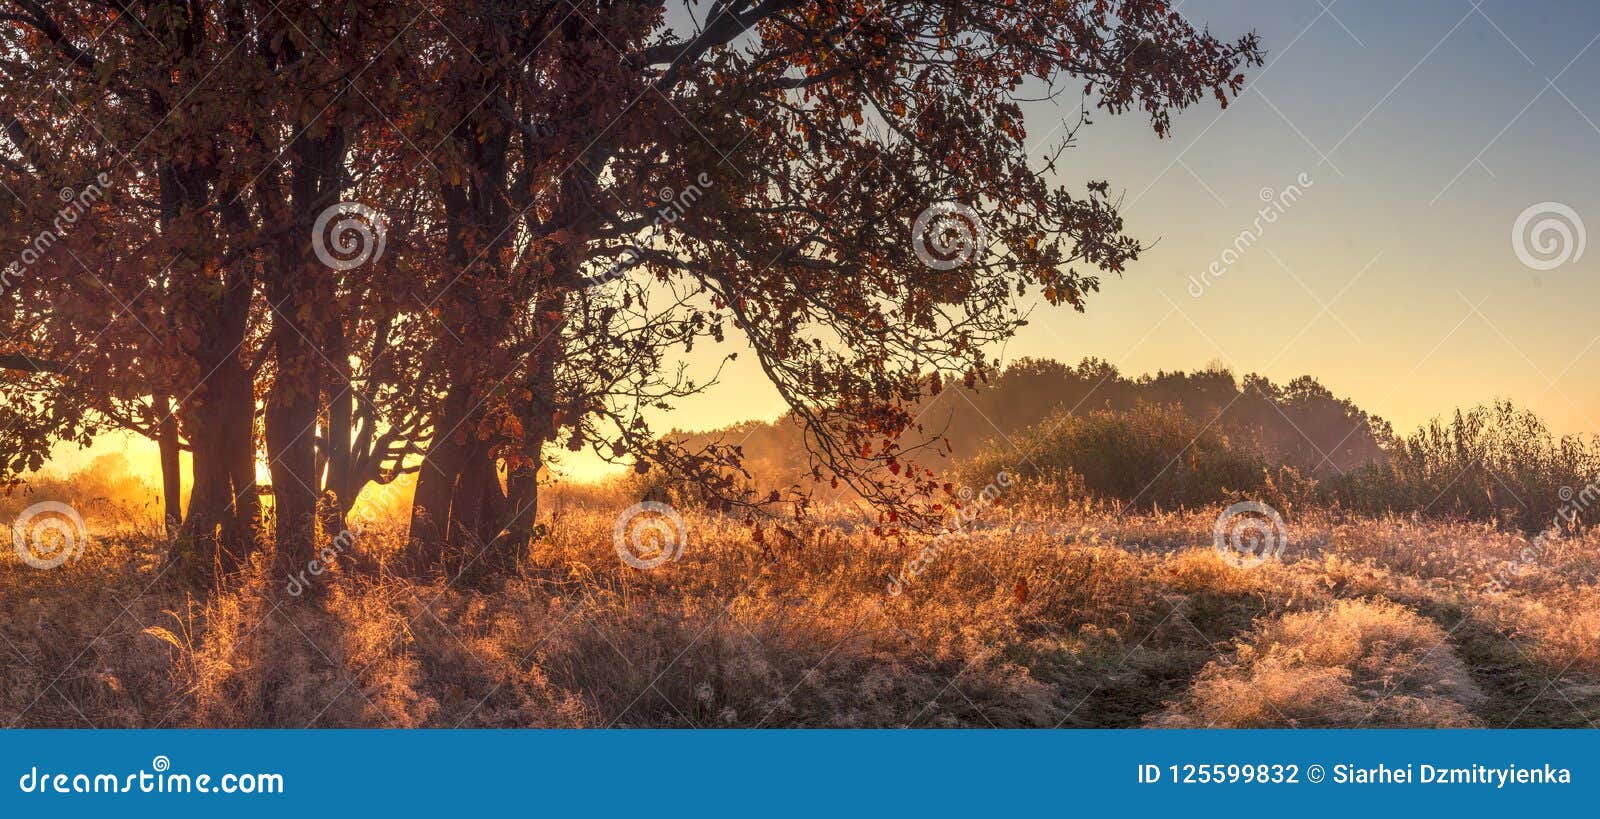 panoramic landscape of autumn nature in the clear october morning. large tree on golden grass in sunlight. autumn nature landscape